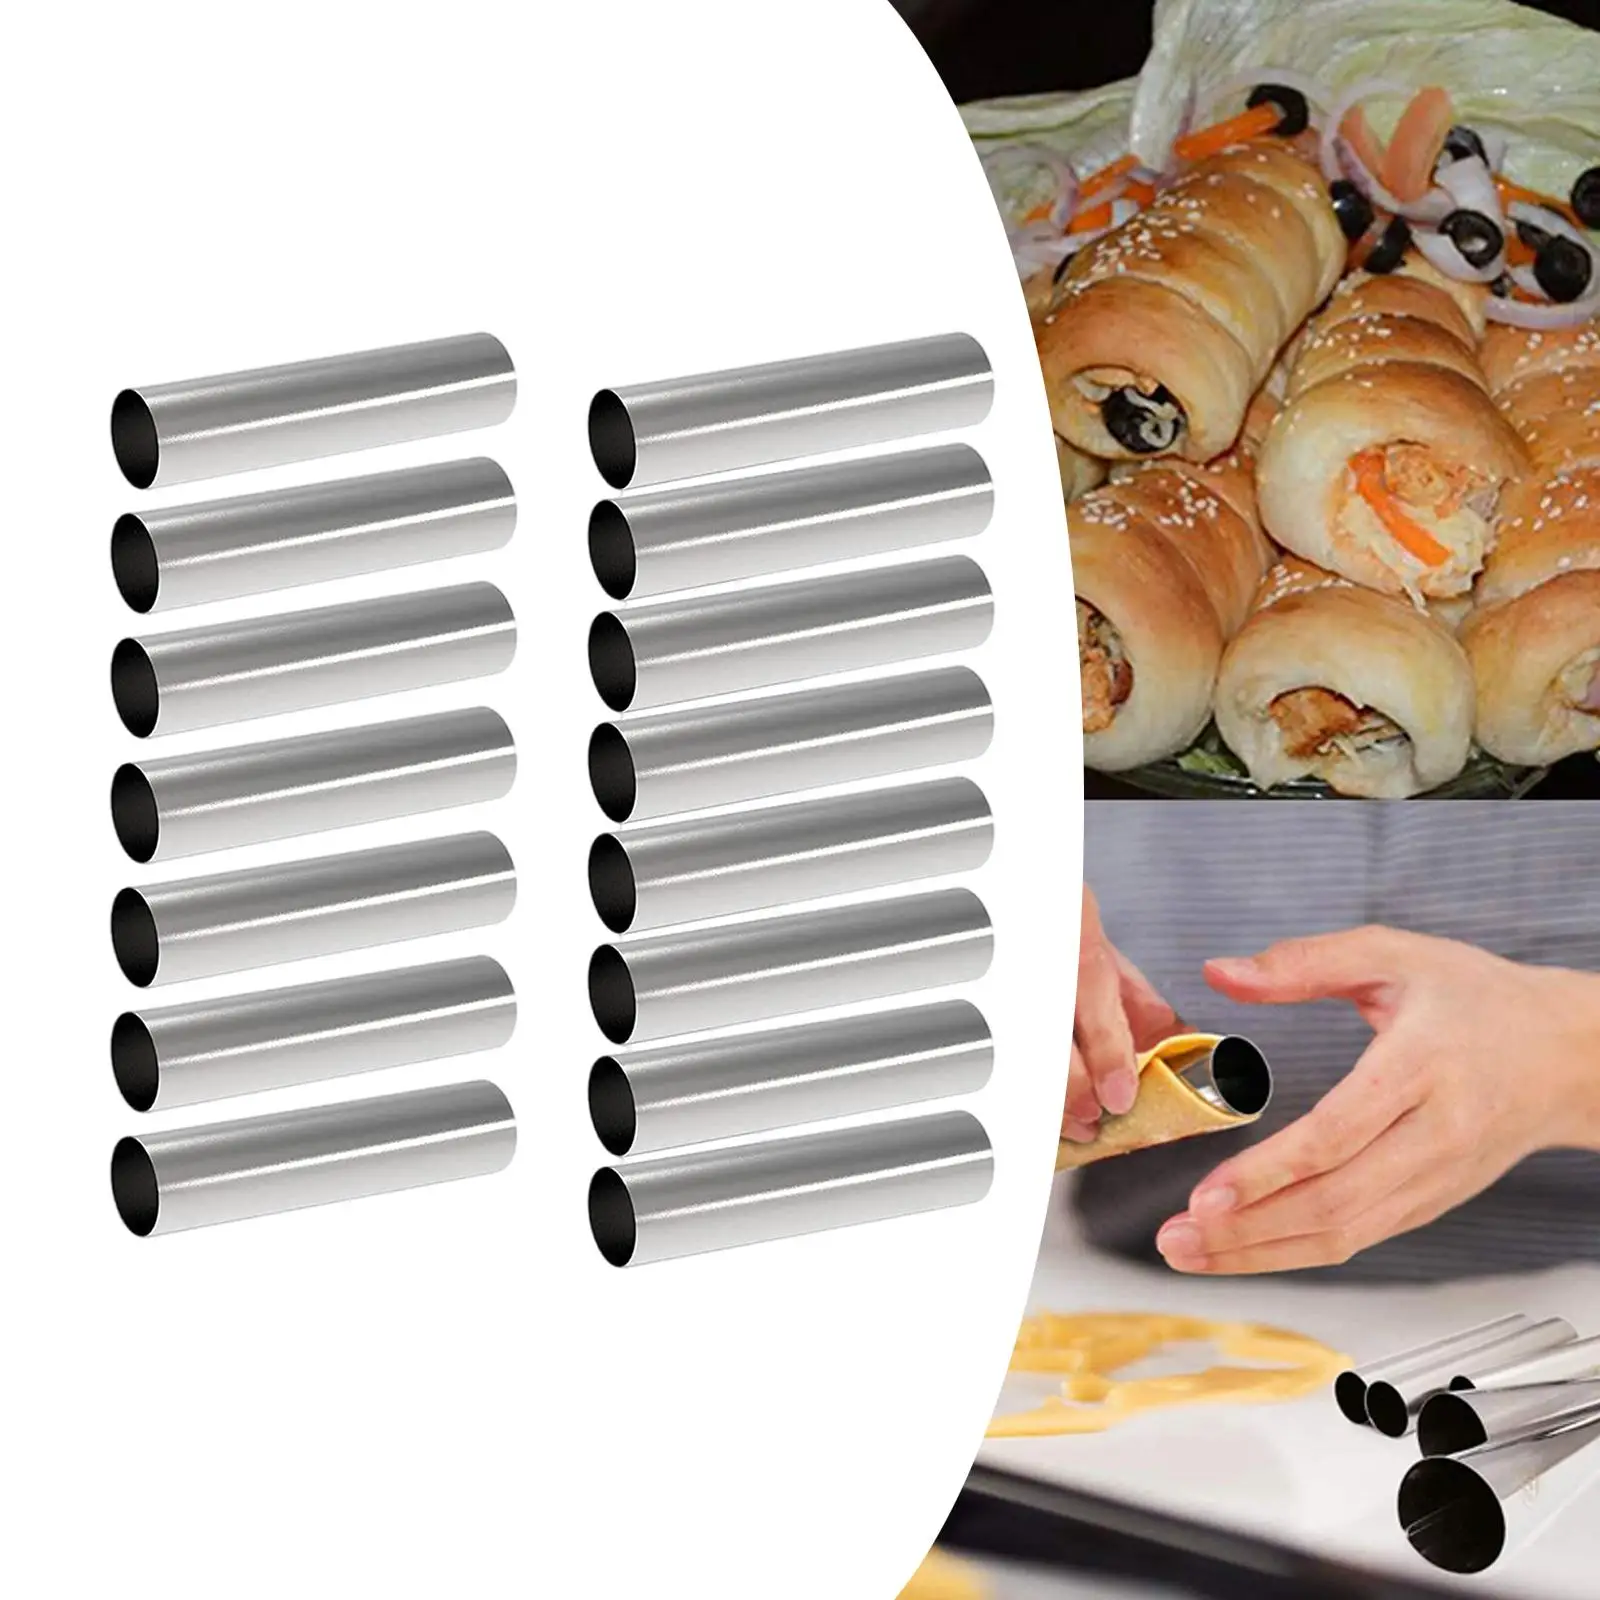 15x Stainless Steel Cannoli Form Tubes Baking Tools for Desserts Making Butter Horns Ice Cream Cones Pastry